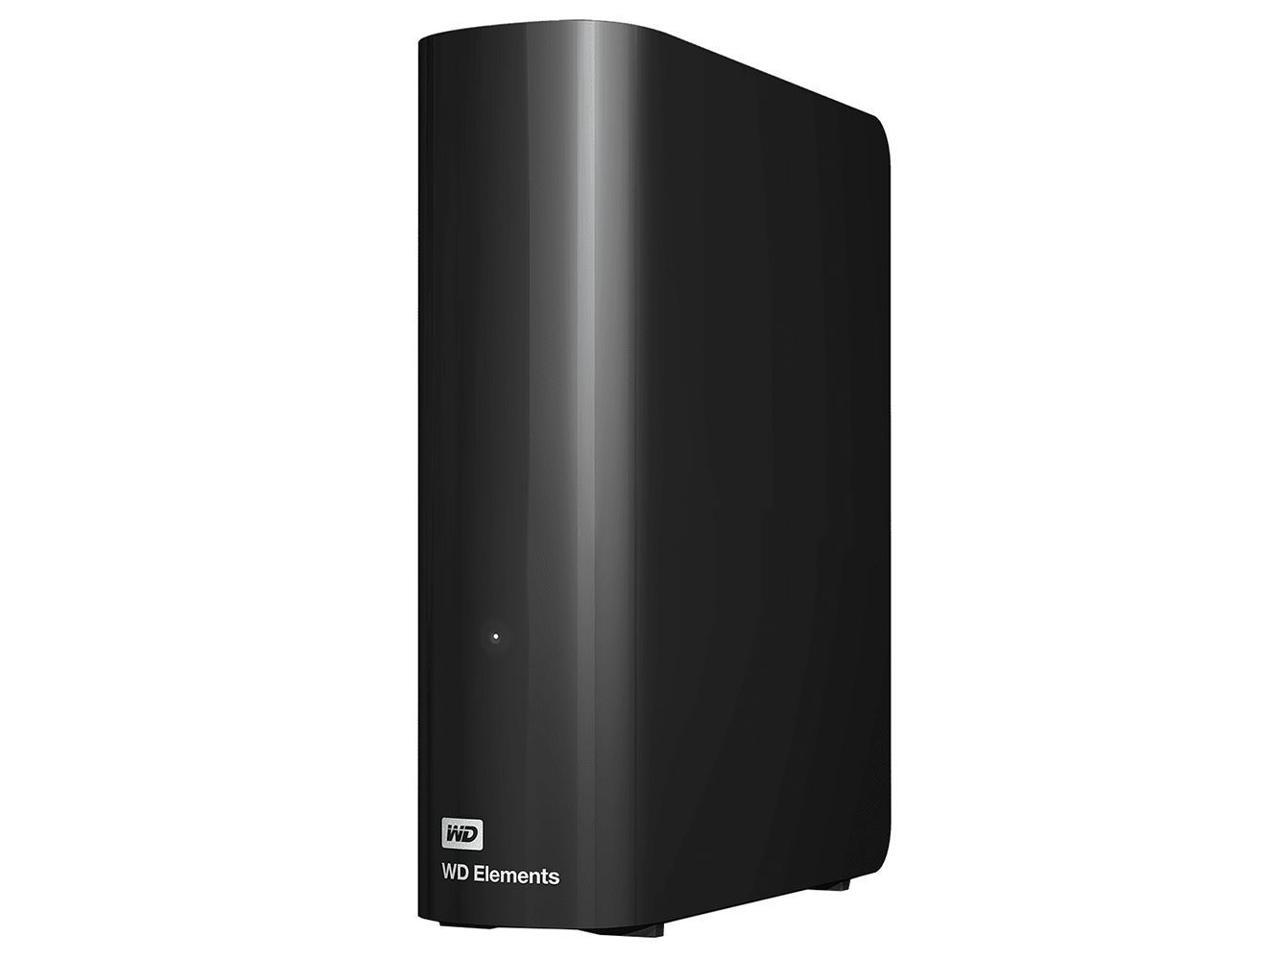 12 TB WD Elements Desktop External Hard Drive with USB 3.0 $190 + Free Shipping